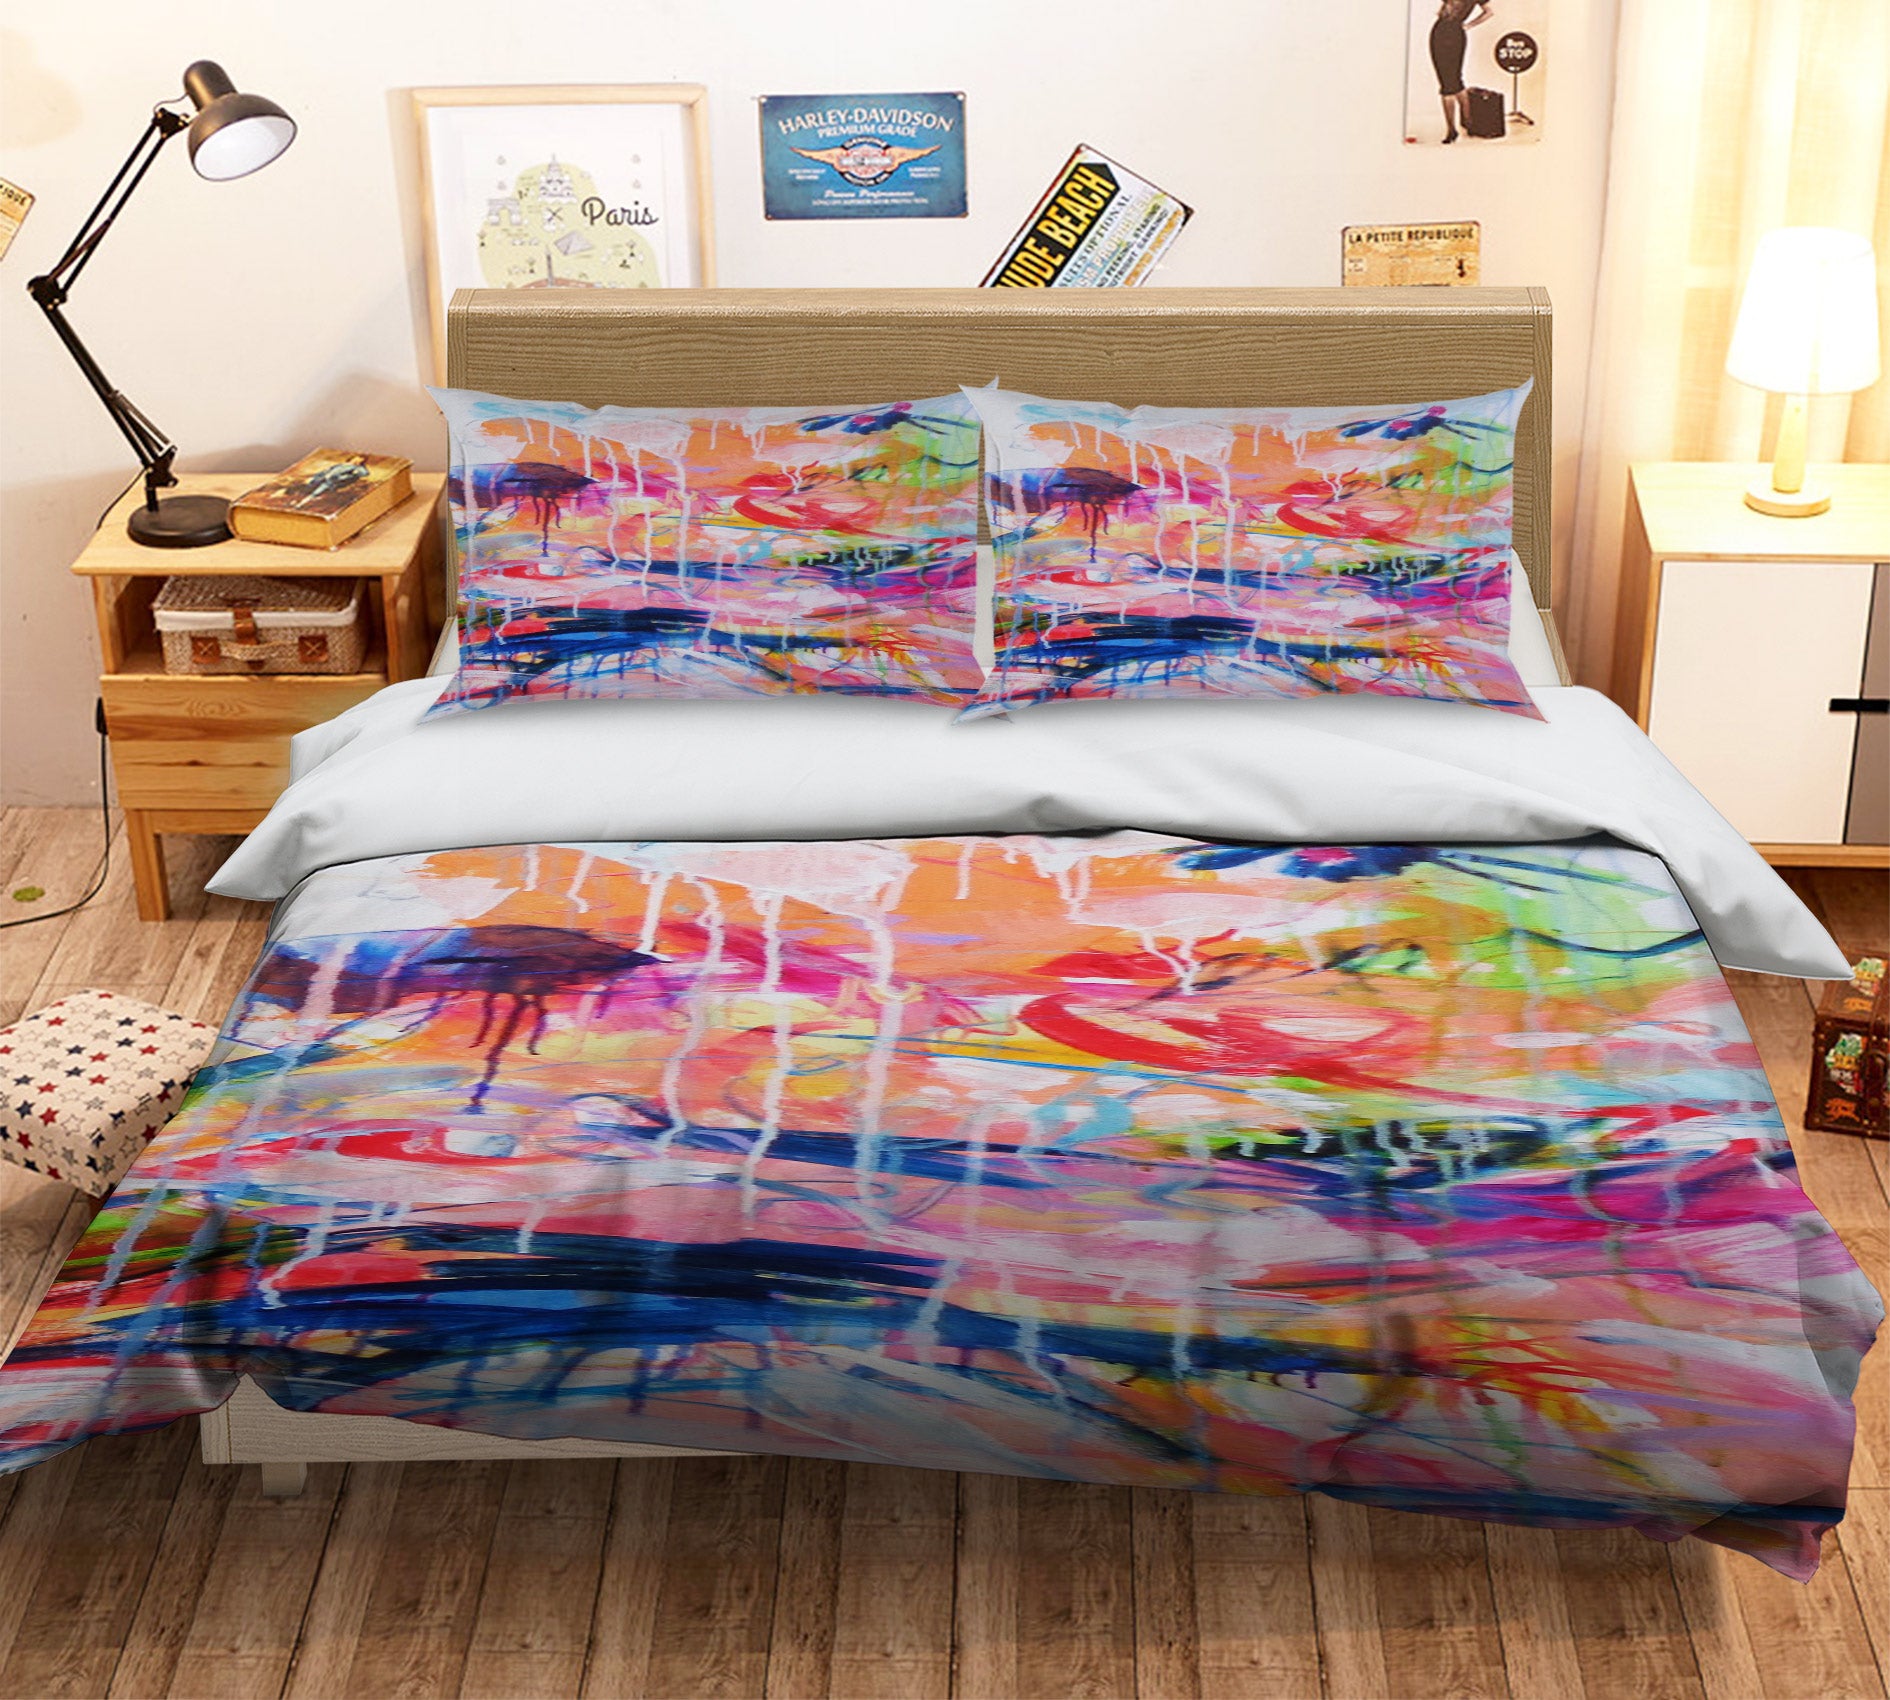 3D Watercolor Style 1200 Misako Chida Bedding Bed Pillowcases Quilt Cover Duvet Cover